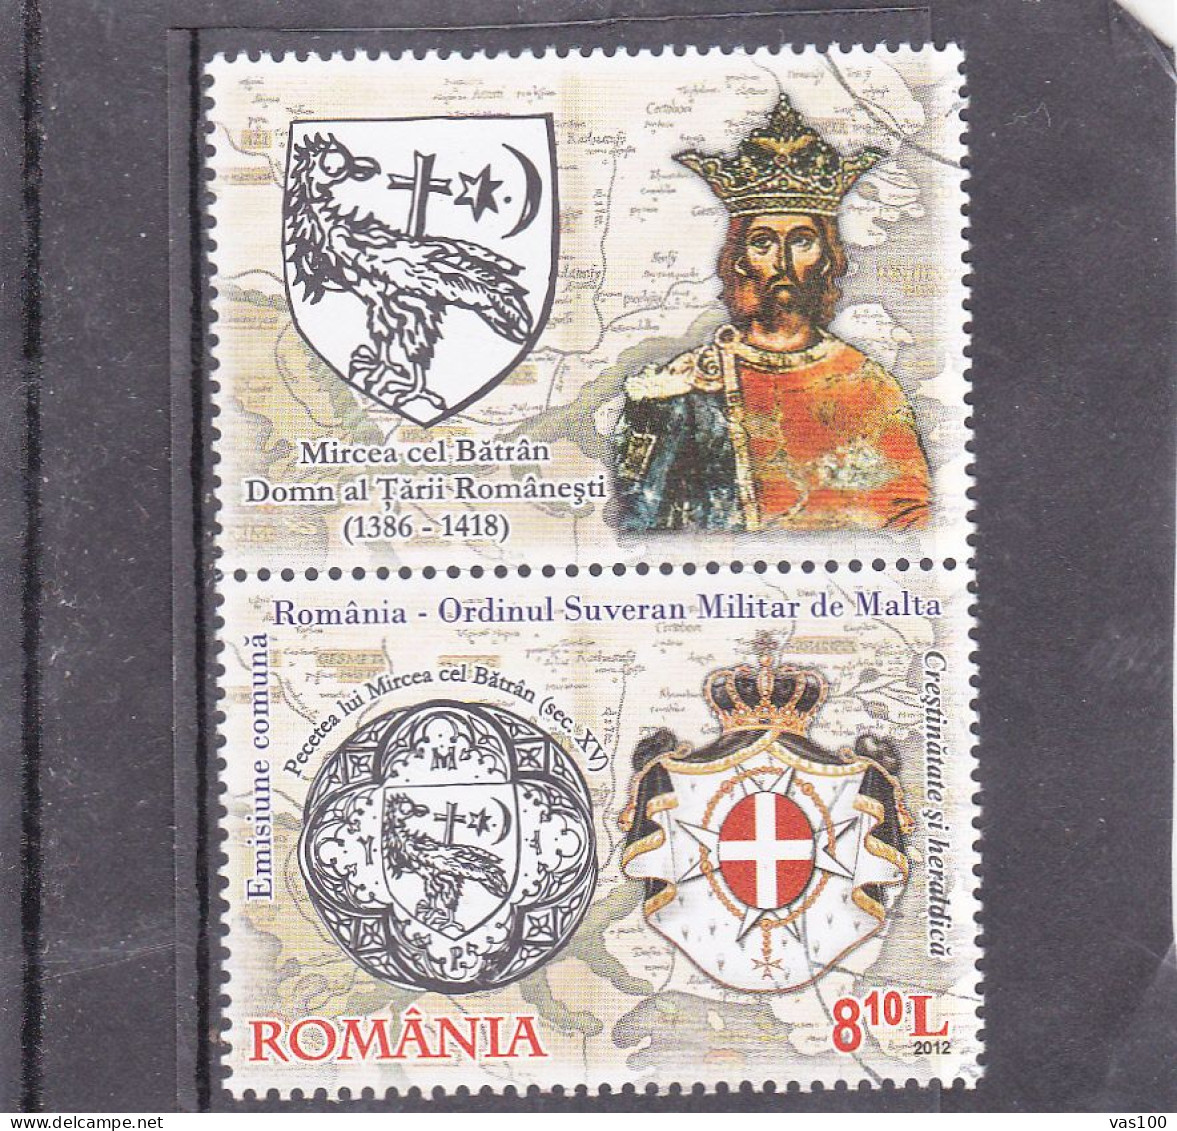 ROMANIA 2012 Relations With Sovereign Maltese Order USED + LABELS. Michel 6667 - Gebraucht